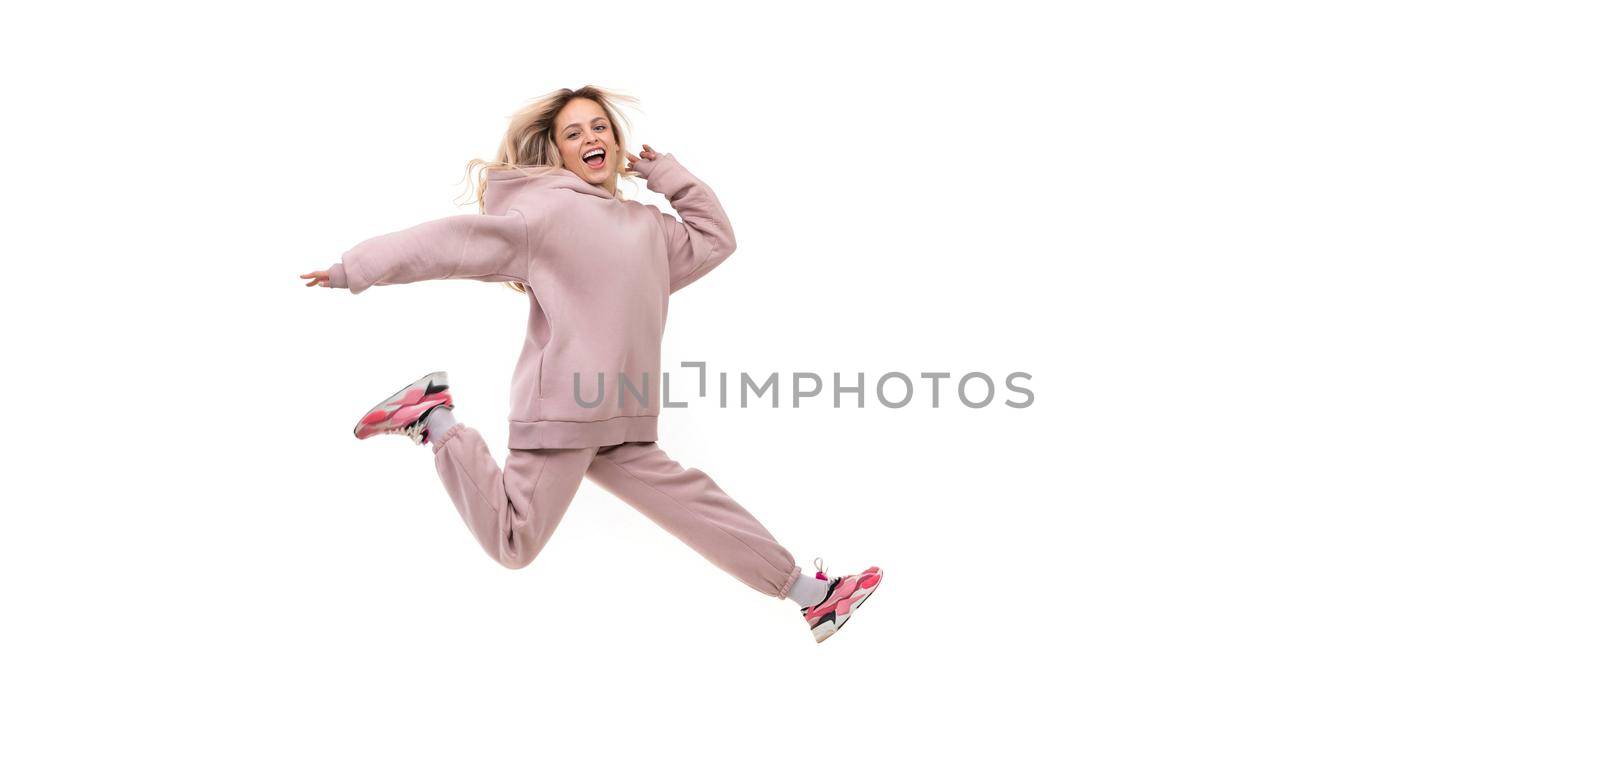 young woman in a jump in a tracksuit of beige color on a white isolated background.